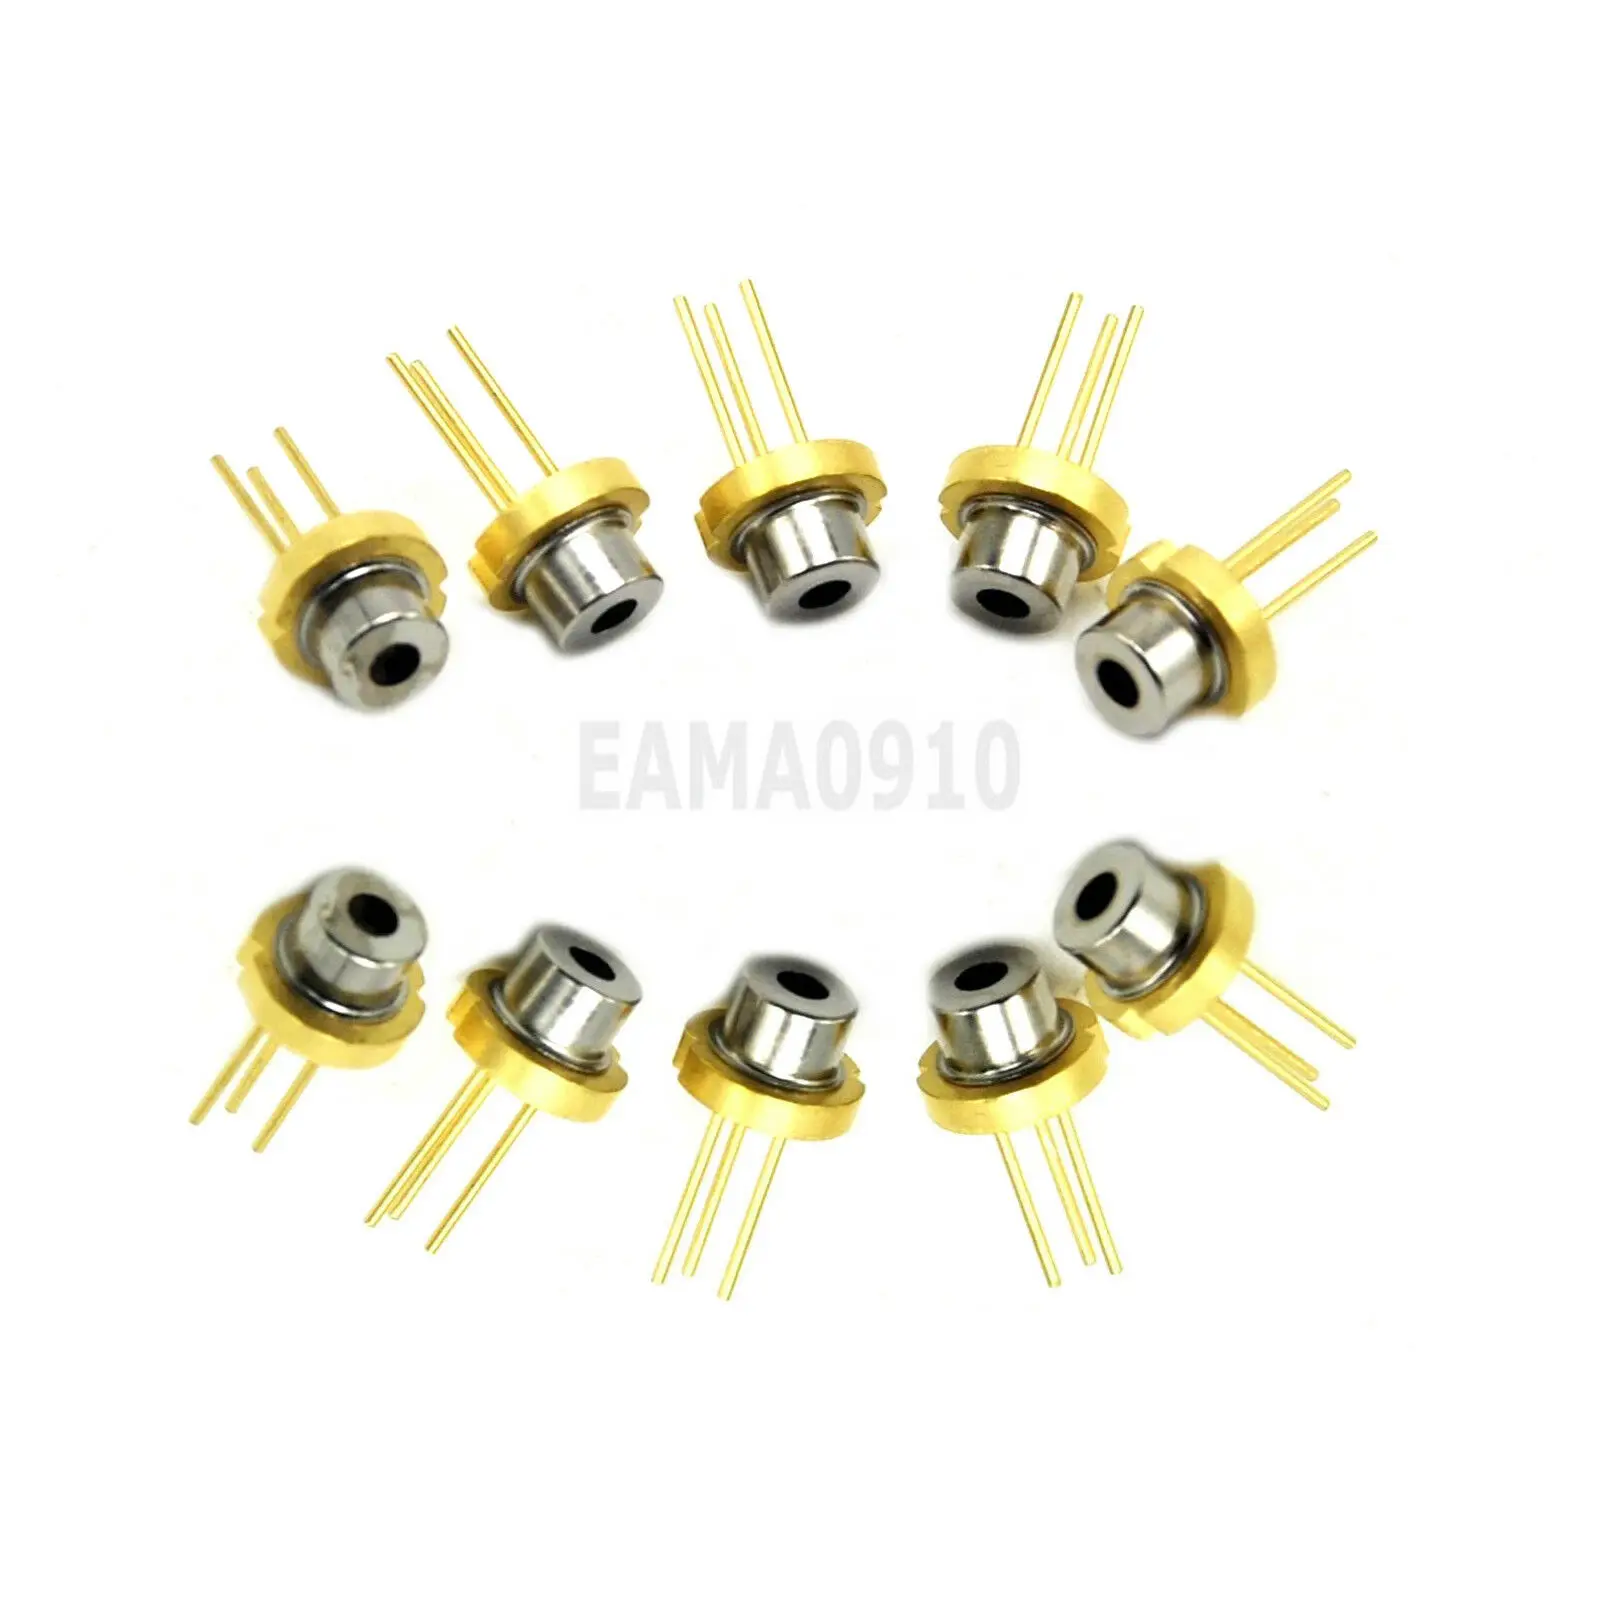 10pcs DL-7140-213 780nm 80mw H type 5.6mm NO PD laser diode TO-18